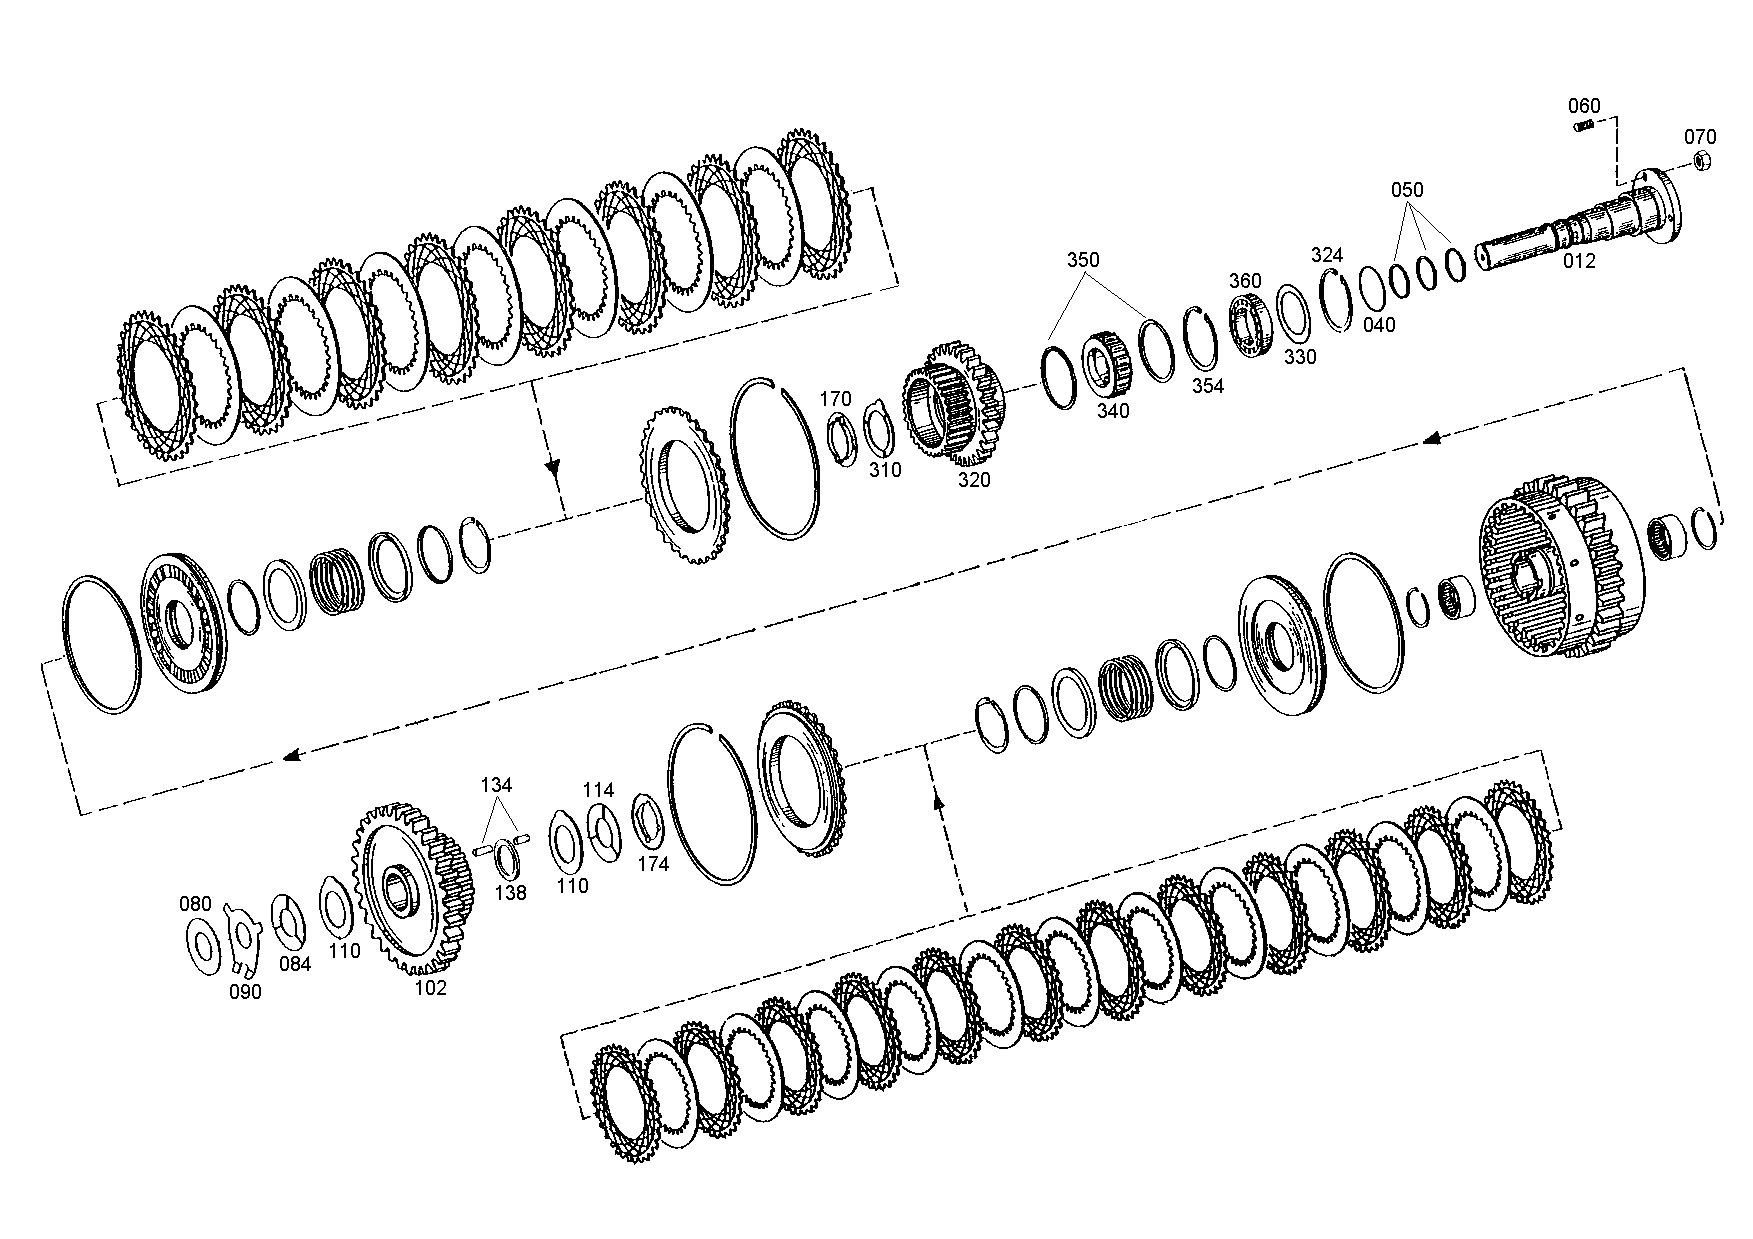 drawing for CNH NEW HOLLAND 185213A1 - AXLE (figure 4)